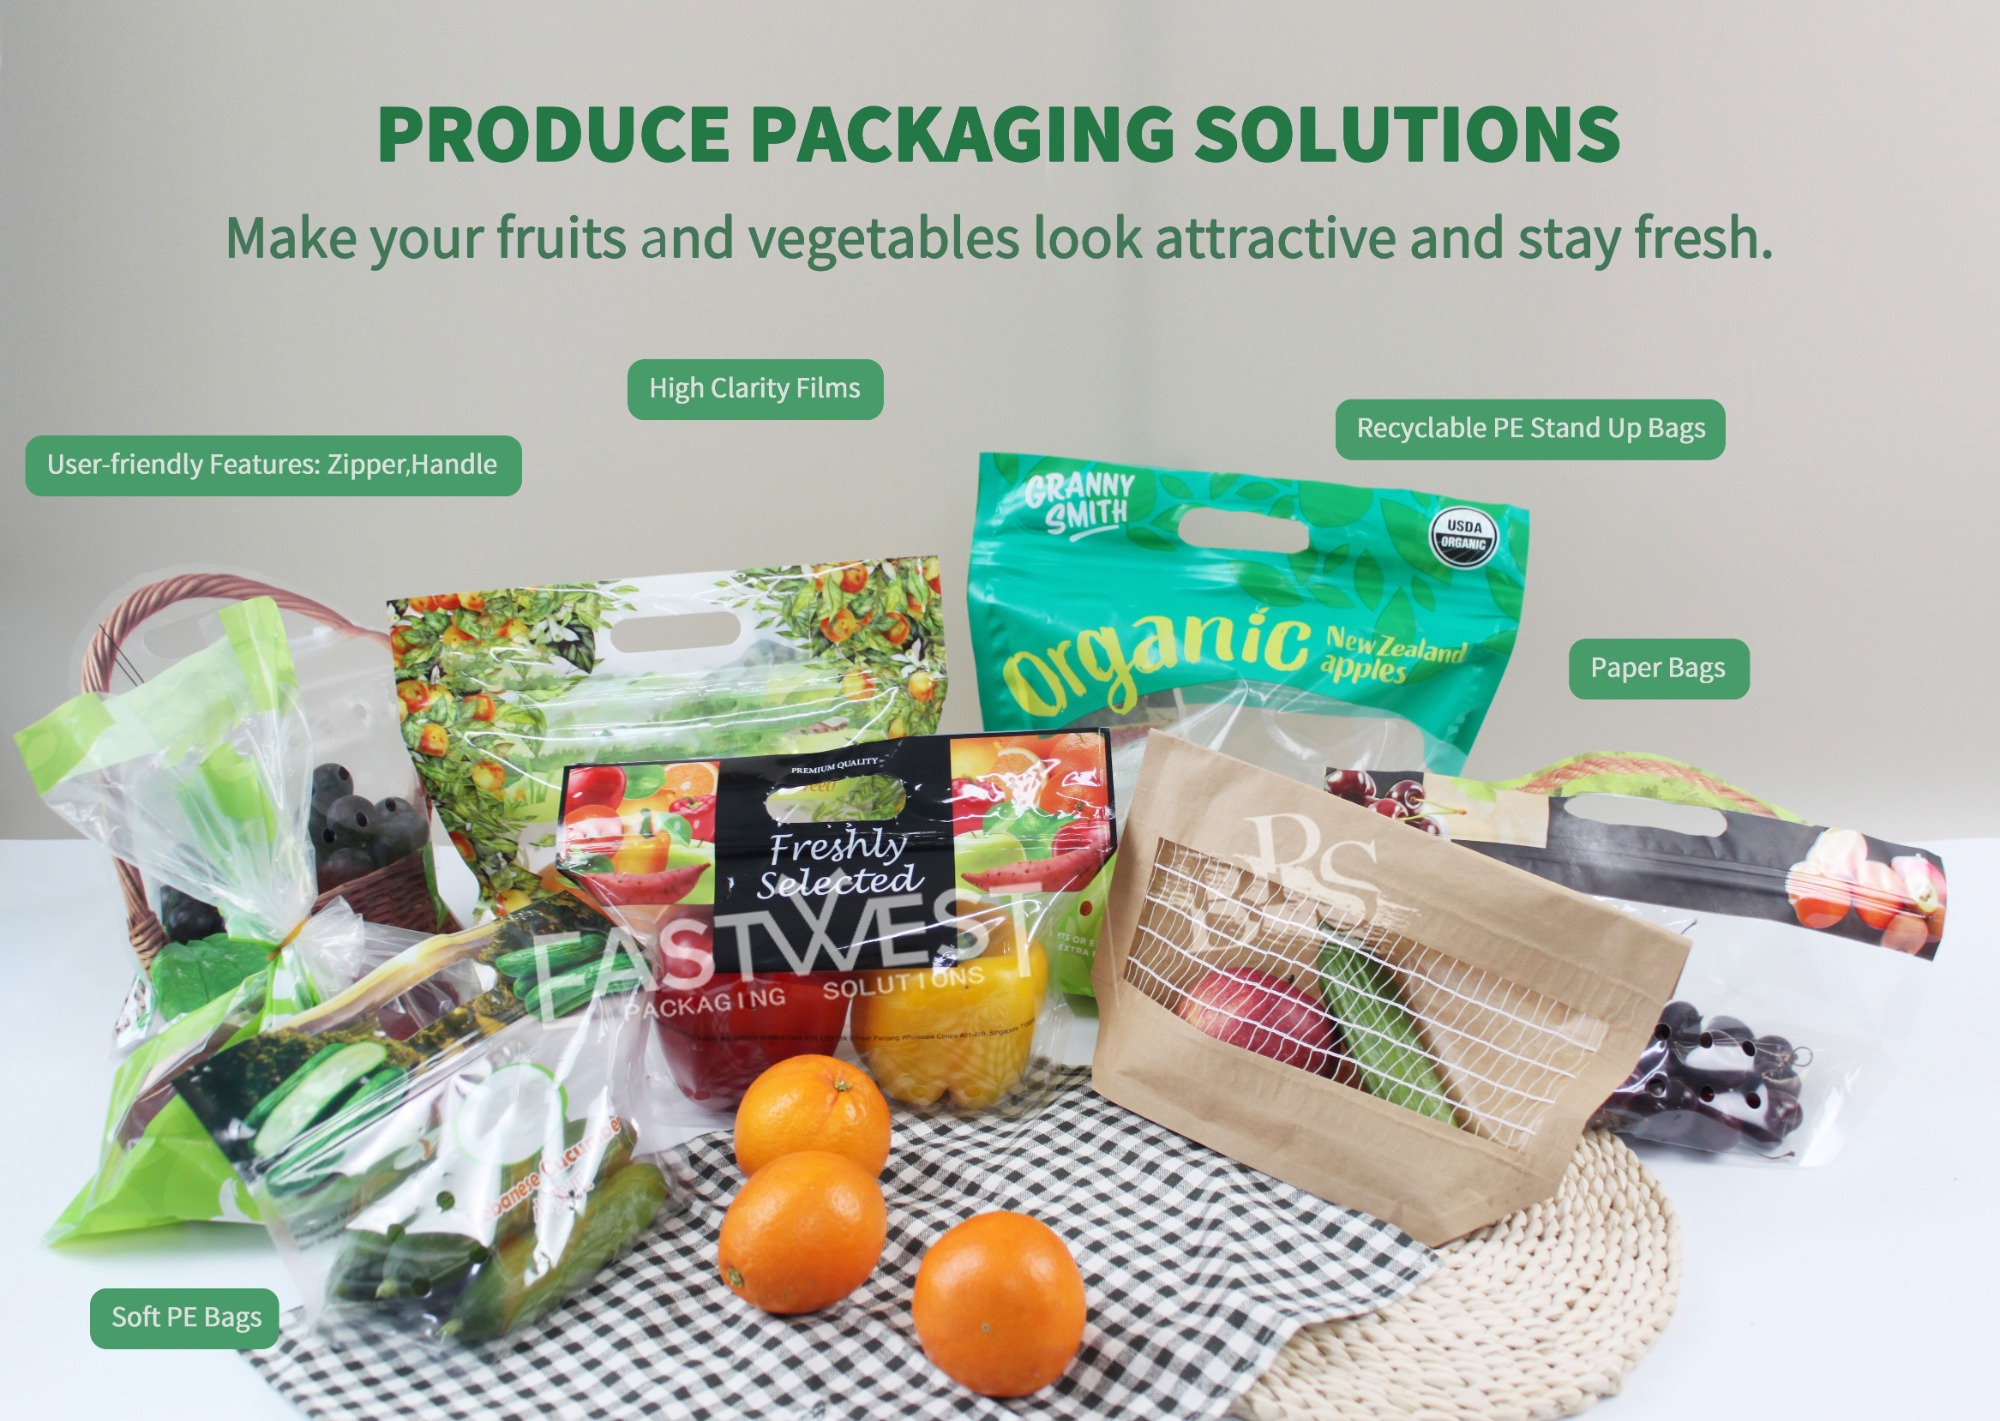 Trends & Innovations for Fresh Produce Pouch Packaging in 2022